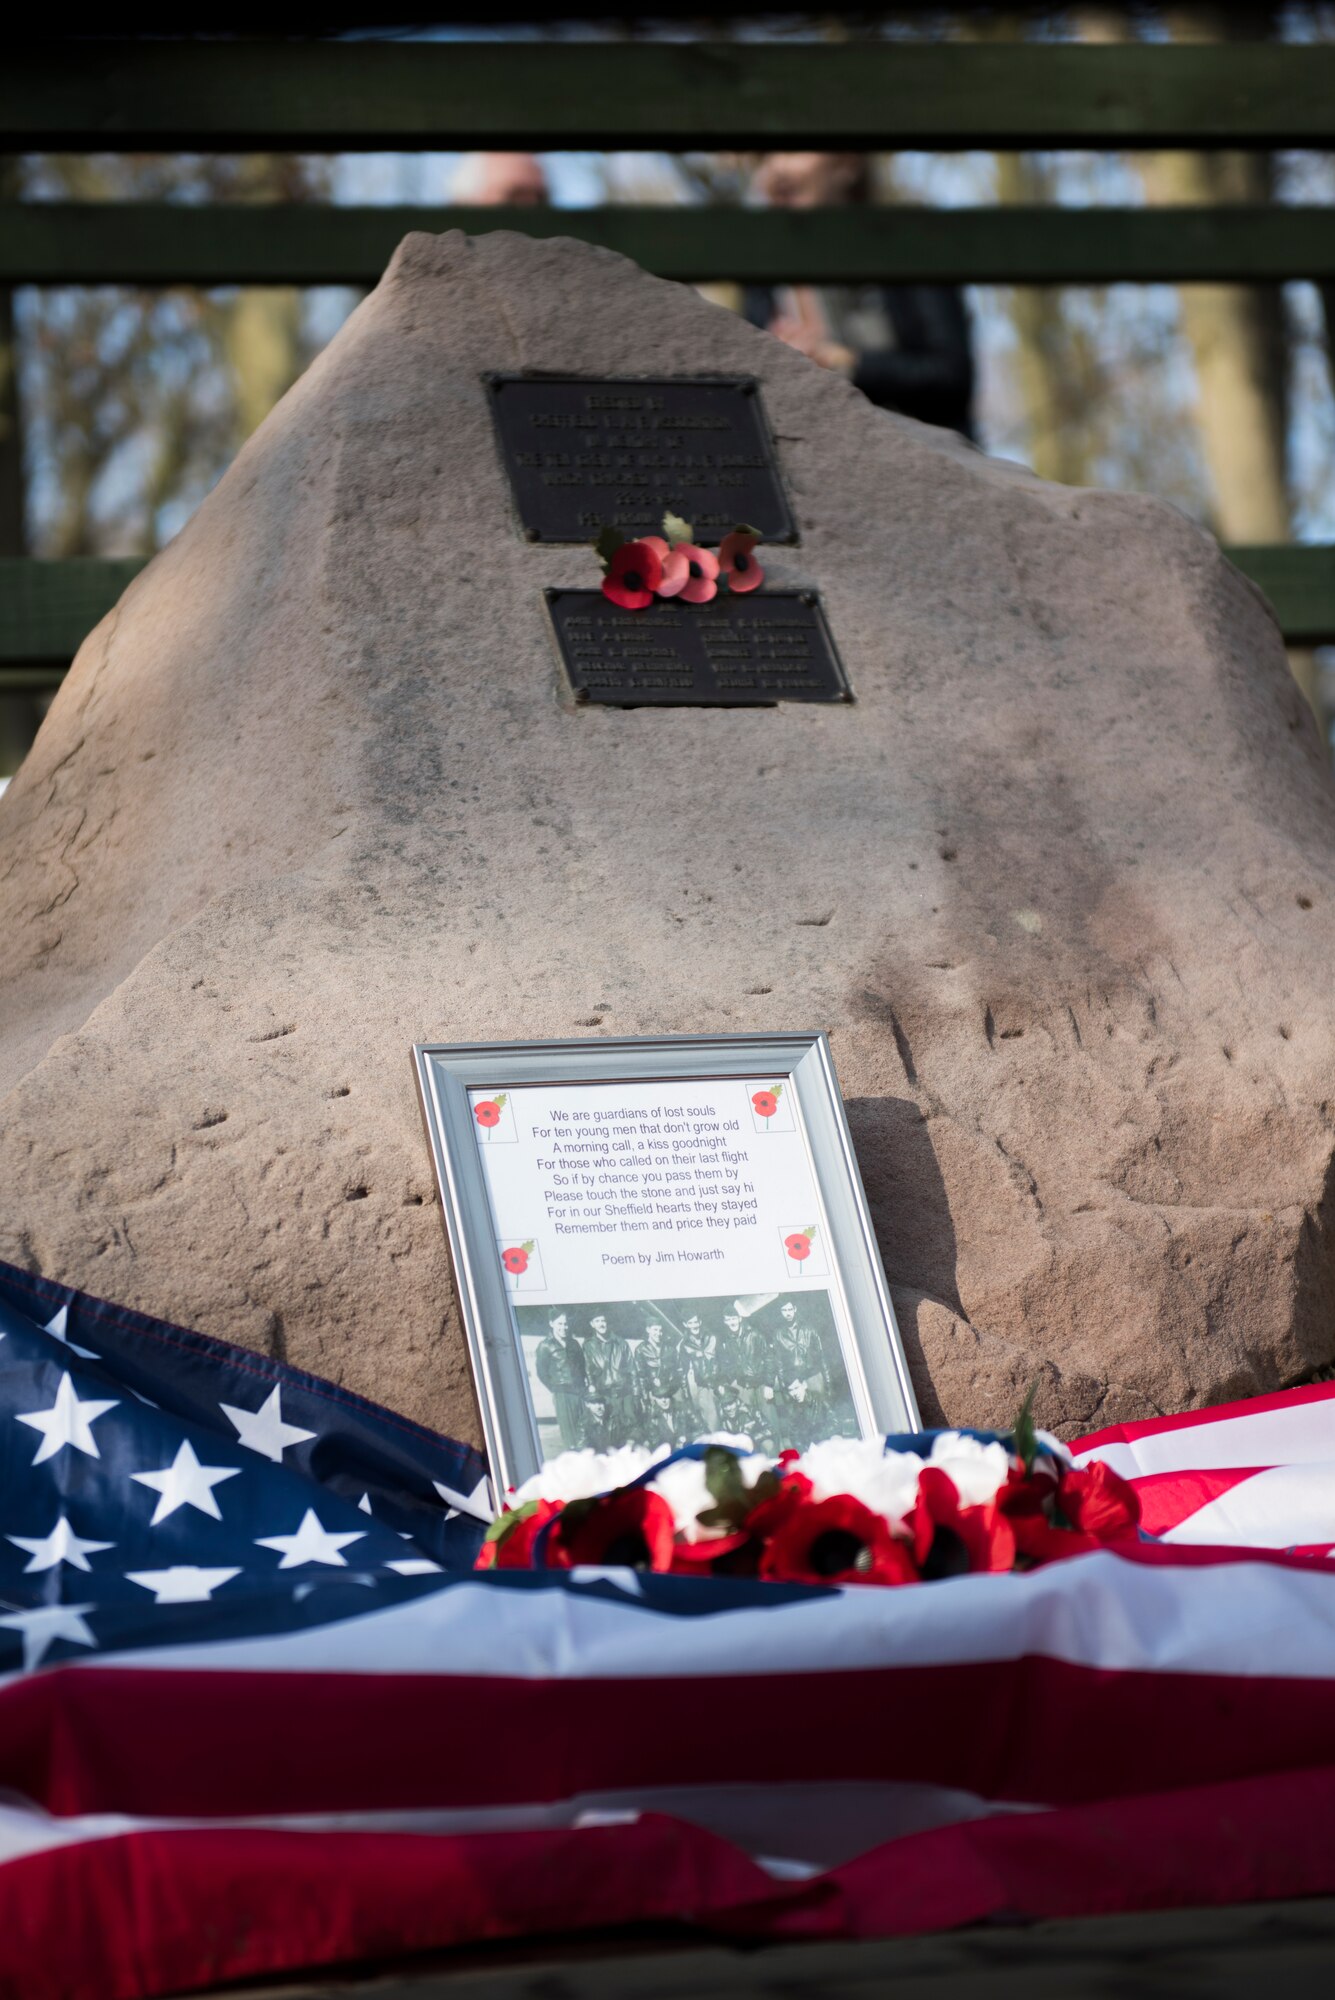 This memorial to the crew of the Mi Amigo rests in Endliffe Park, Sheffield, United Kingdom, where it has been tended by Mr. Tony Foulds for over 60 years. This year’s annual memorial service was accompanied by a United States Air Force and Royal Air Force flypast in Endcliffe Park two days prior, where thousands of U.K. residents honored the memory of ten fallen U.S. Airmen who died when their war-crippled B-17 Flying Fortress crash landed to avoid killing residents and nearby children. (U.S. Air Force photo by Tech Sgt. Aaron Thomasson)